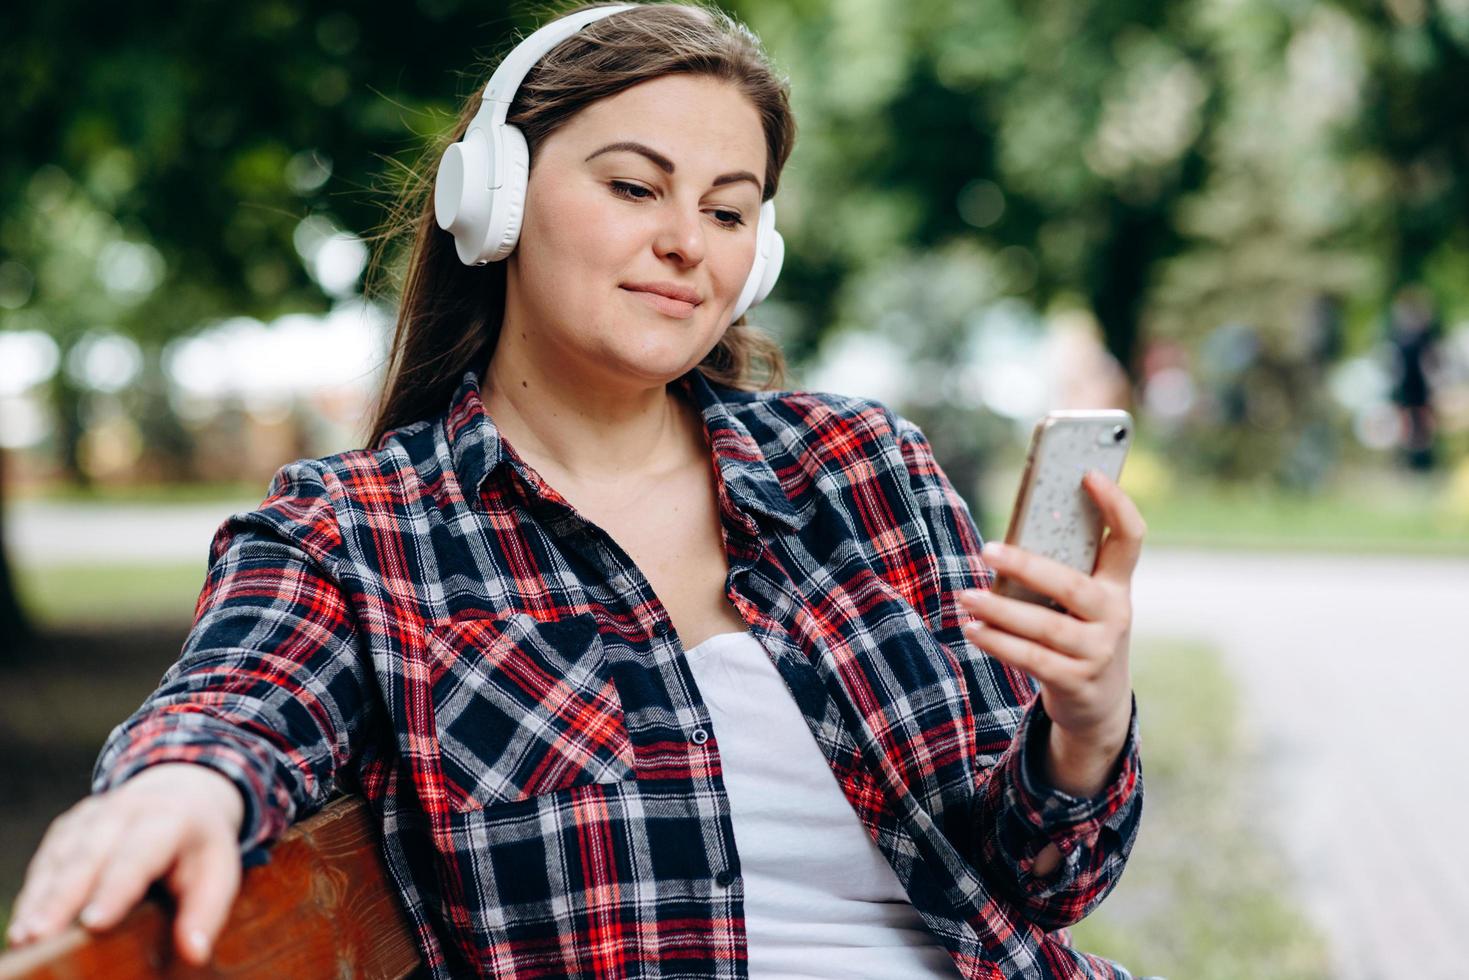 Cute woman, plus size, sitting on a bench in headphones, looking at a smartphone photo